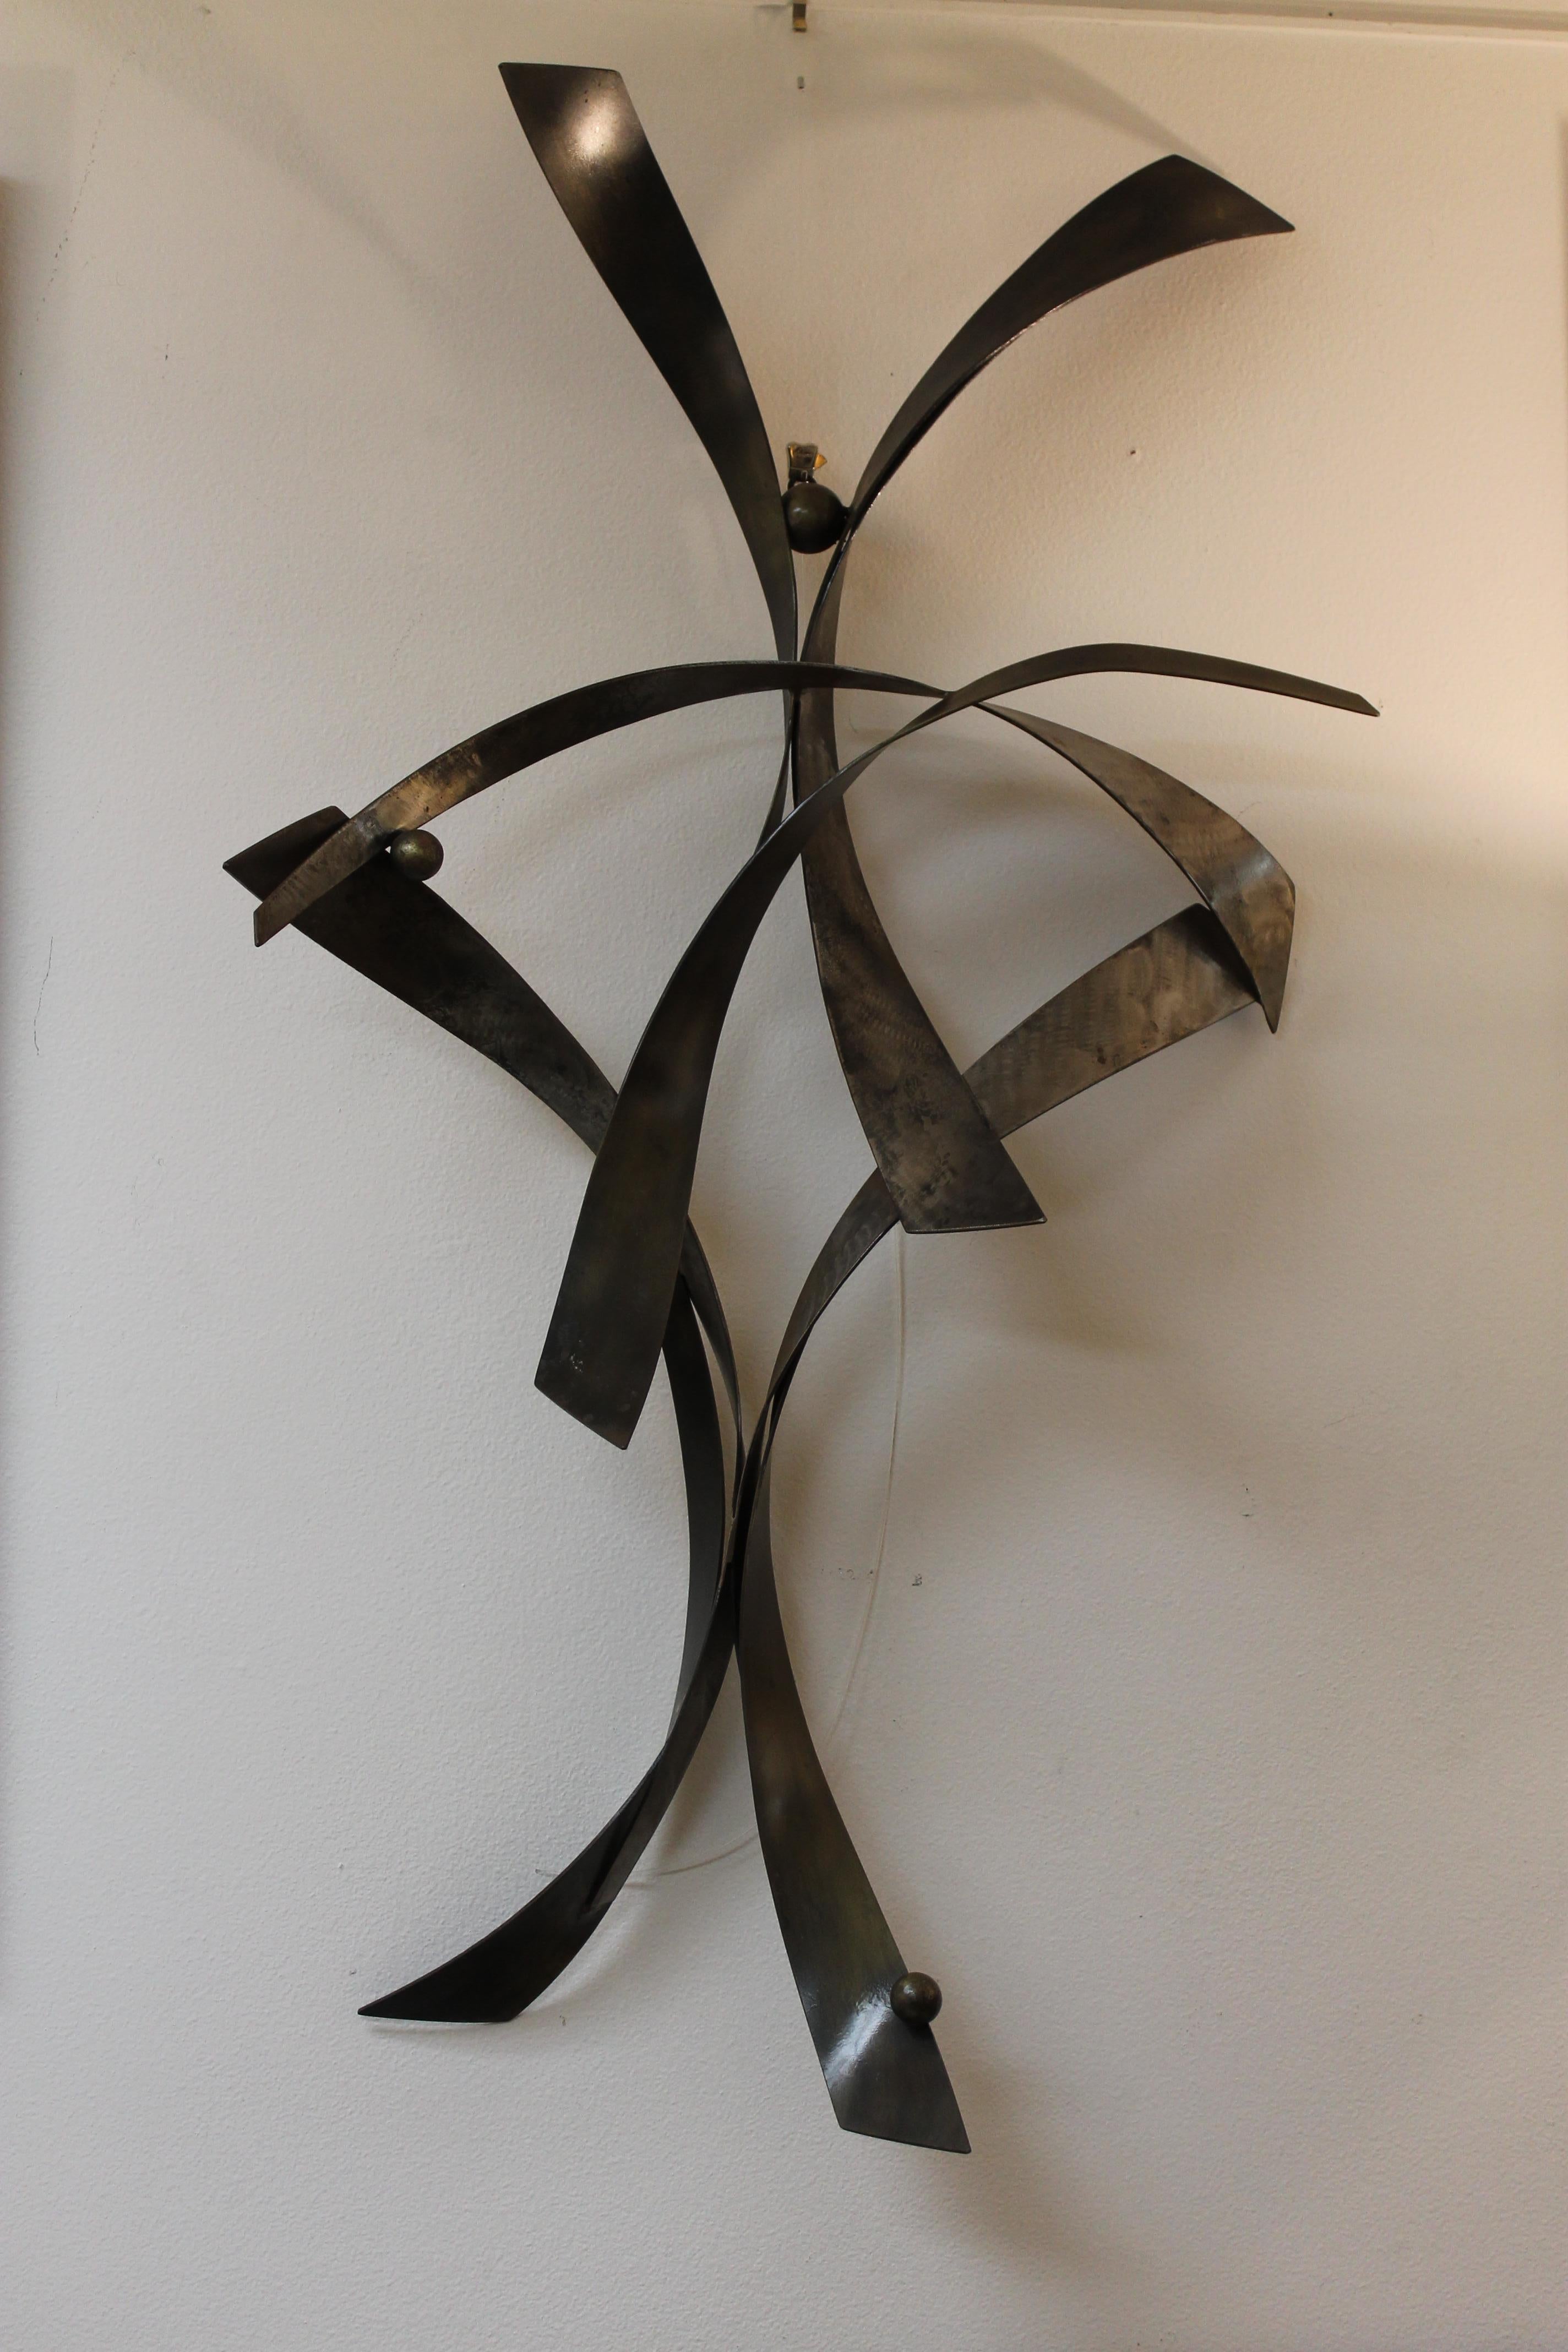 Brutalist steel wall sculpture with original patina. There are 2 steel rings which enable this sculpture to hang either vertical or horizontal. Sculpture measures 31